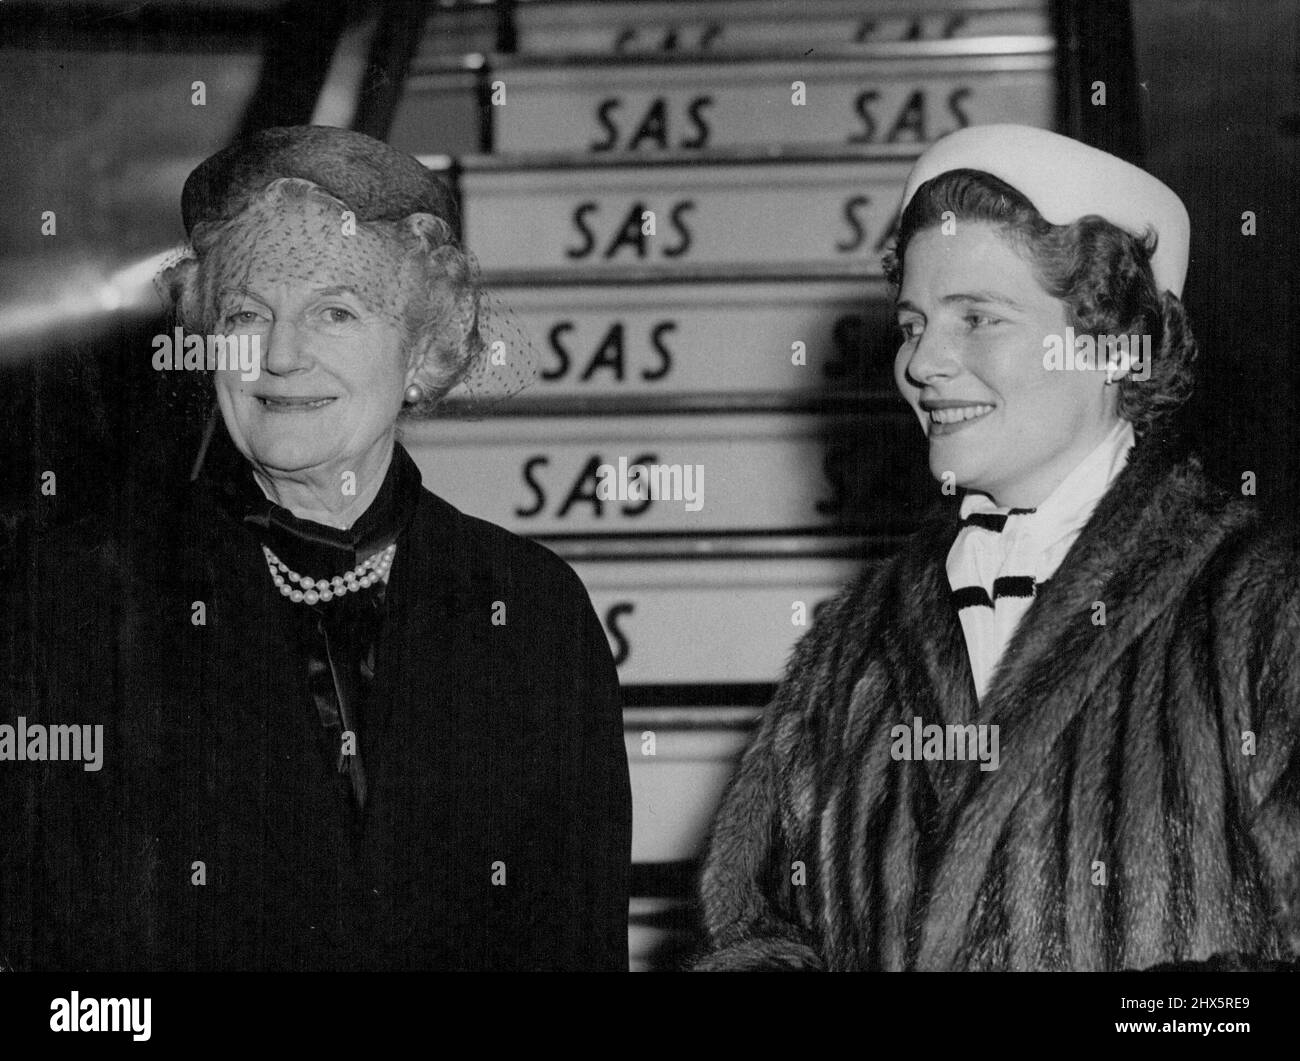 To Receive Sir Winston's Prize -- Lady Churchill (left) and Mrs. Christopher Soames, at London Airport today before their department for Stockholm. Lady Churchill, accompanied by her daughter, Mrs. Christopher Soames, left London today for Stockholm. She is to attend the presentation of Nobel Prize awards and will receive on behalf of her husband, Sir Winston Churchill, the 1953 Literary Prize. December 08, 1953. (Photo by Paul Popper Ltd.). Stock Photo